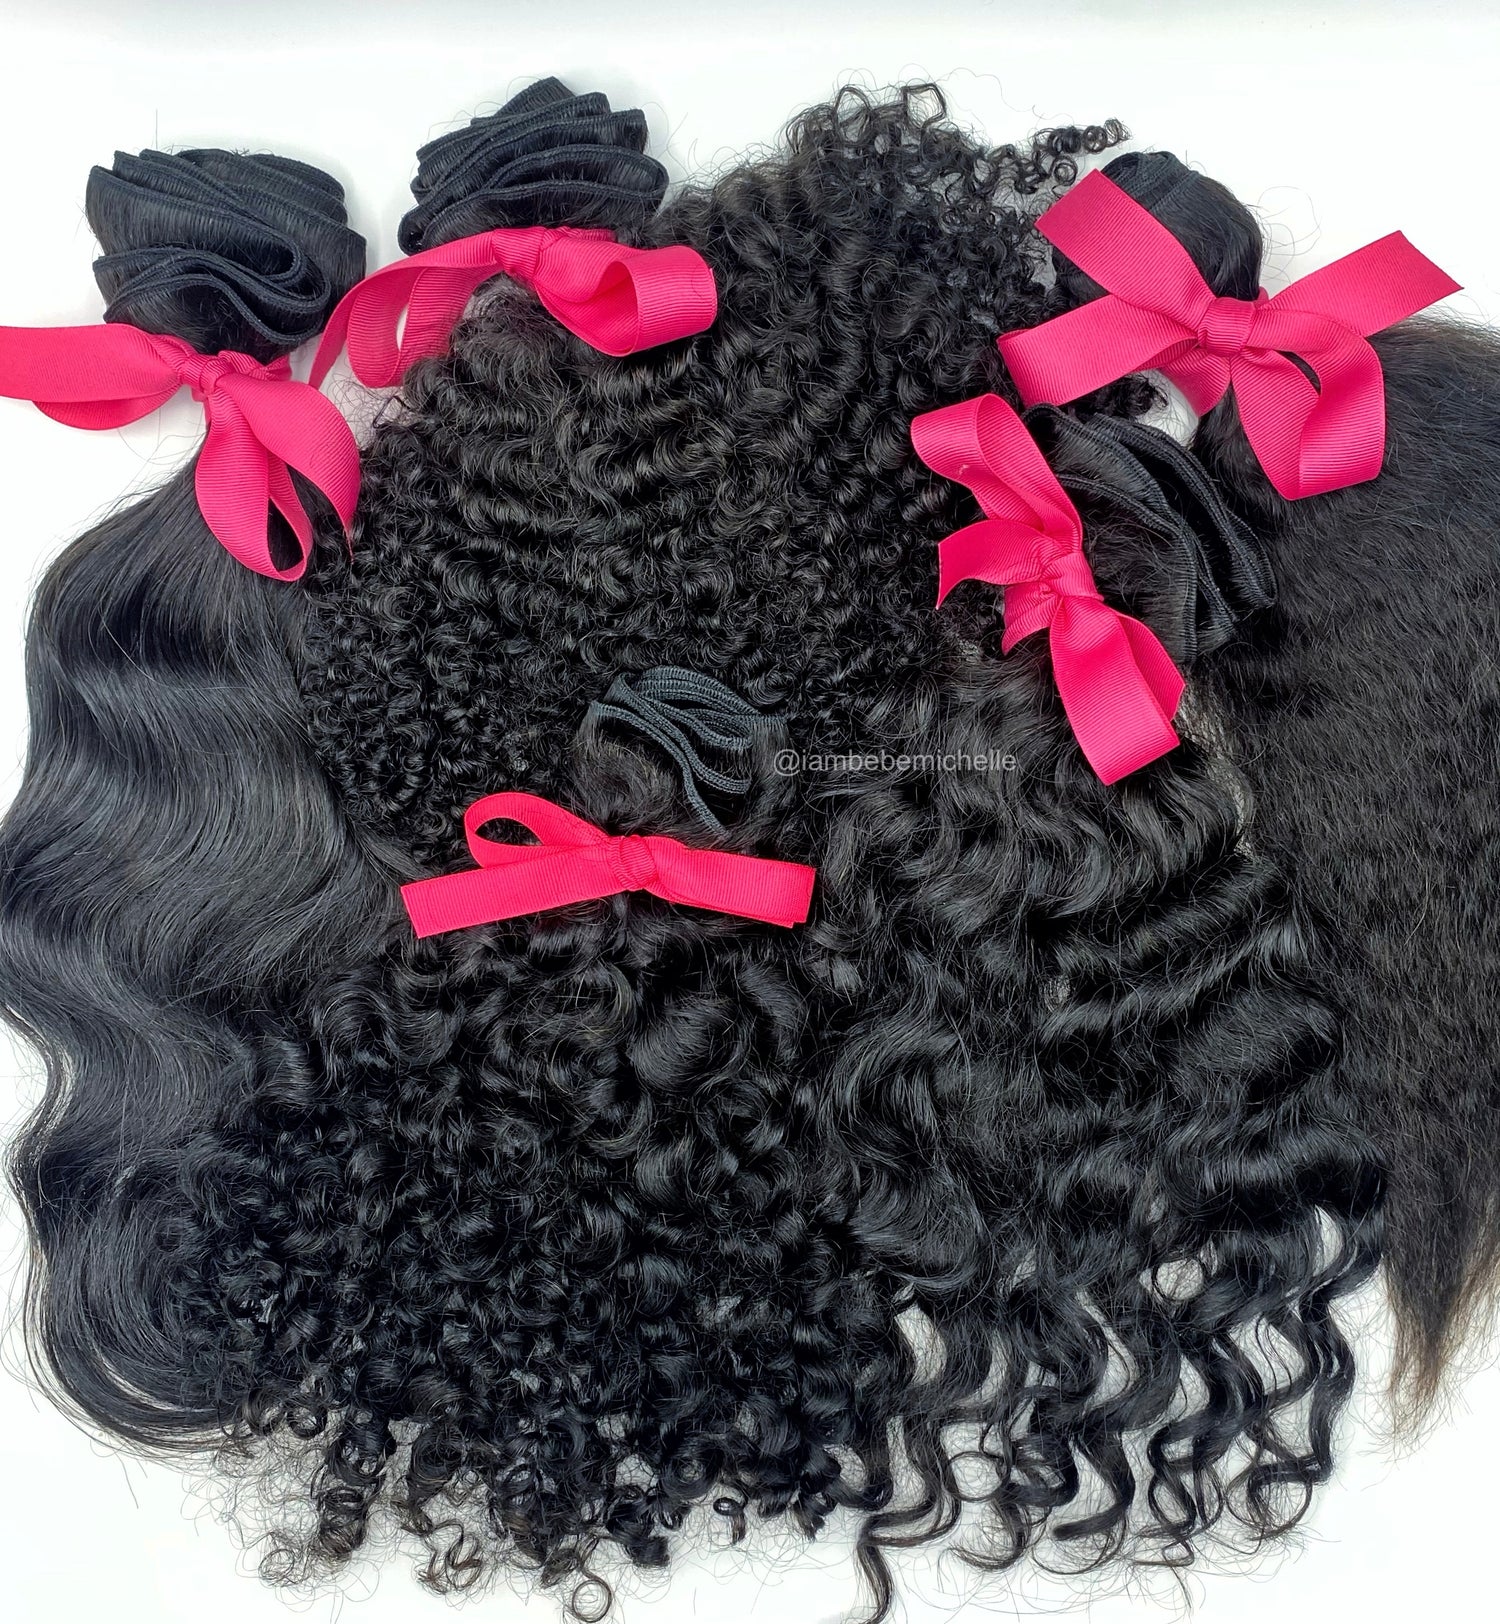 BM Extensions - Virgin Luxury Hair Extensions To Match Your Curly Texture, Or Change Your Look